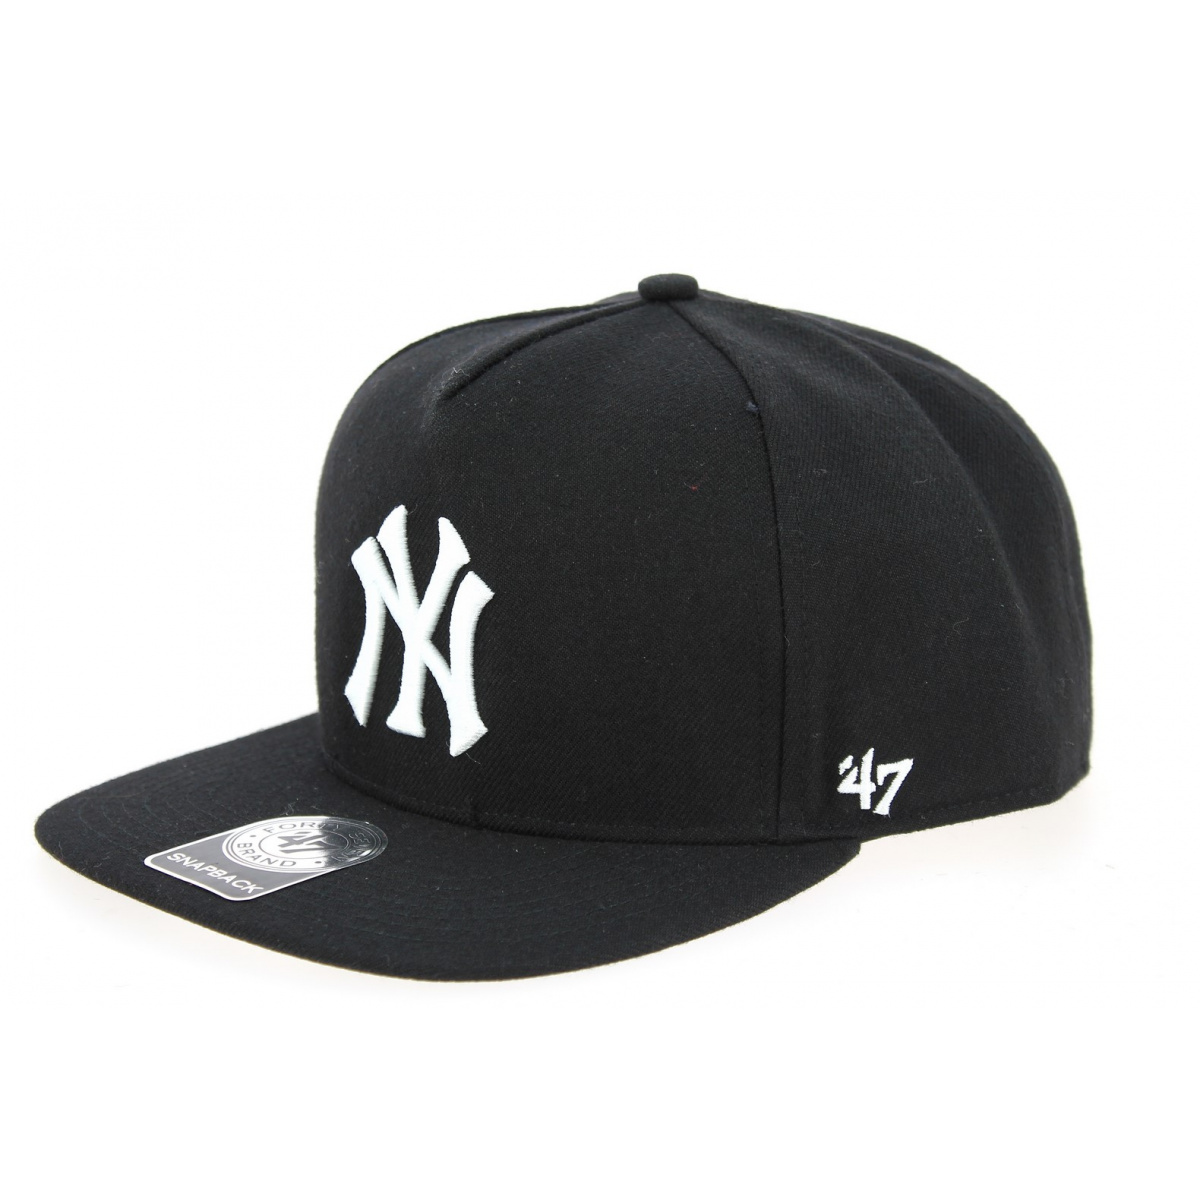 https://media2.chapellerie-traclet.com/65376-thickbox_default/casquette-ny-yankees-fantaisie-47-brand.jpg